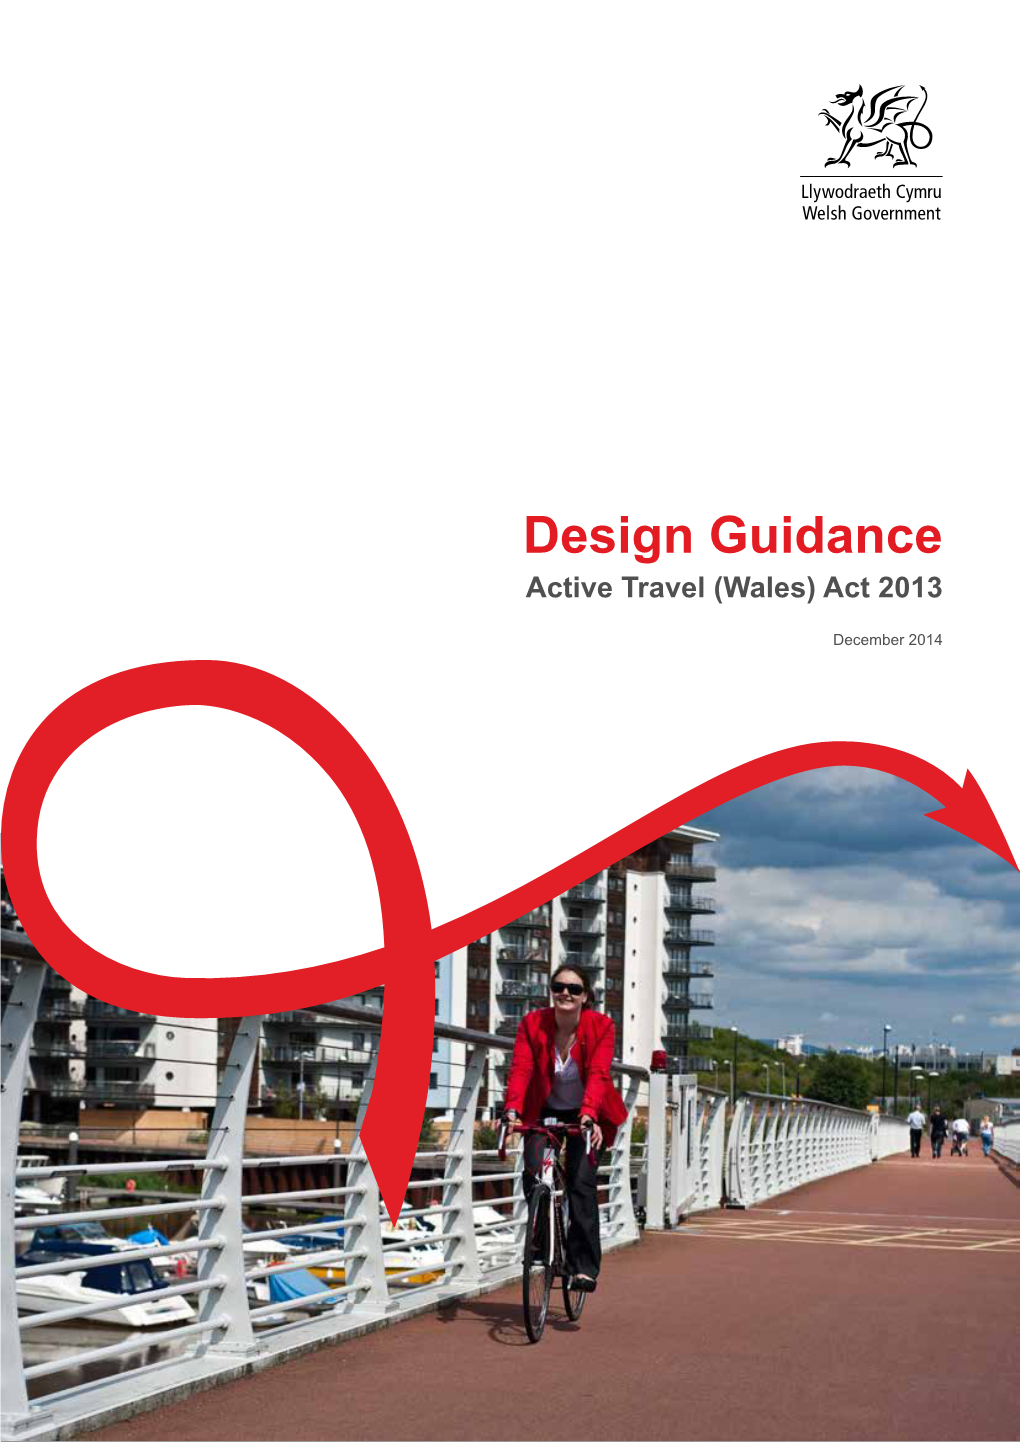 Active Travel Design Guidance Was Produced by the Following Team on Behalf of the Welsh Government